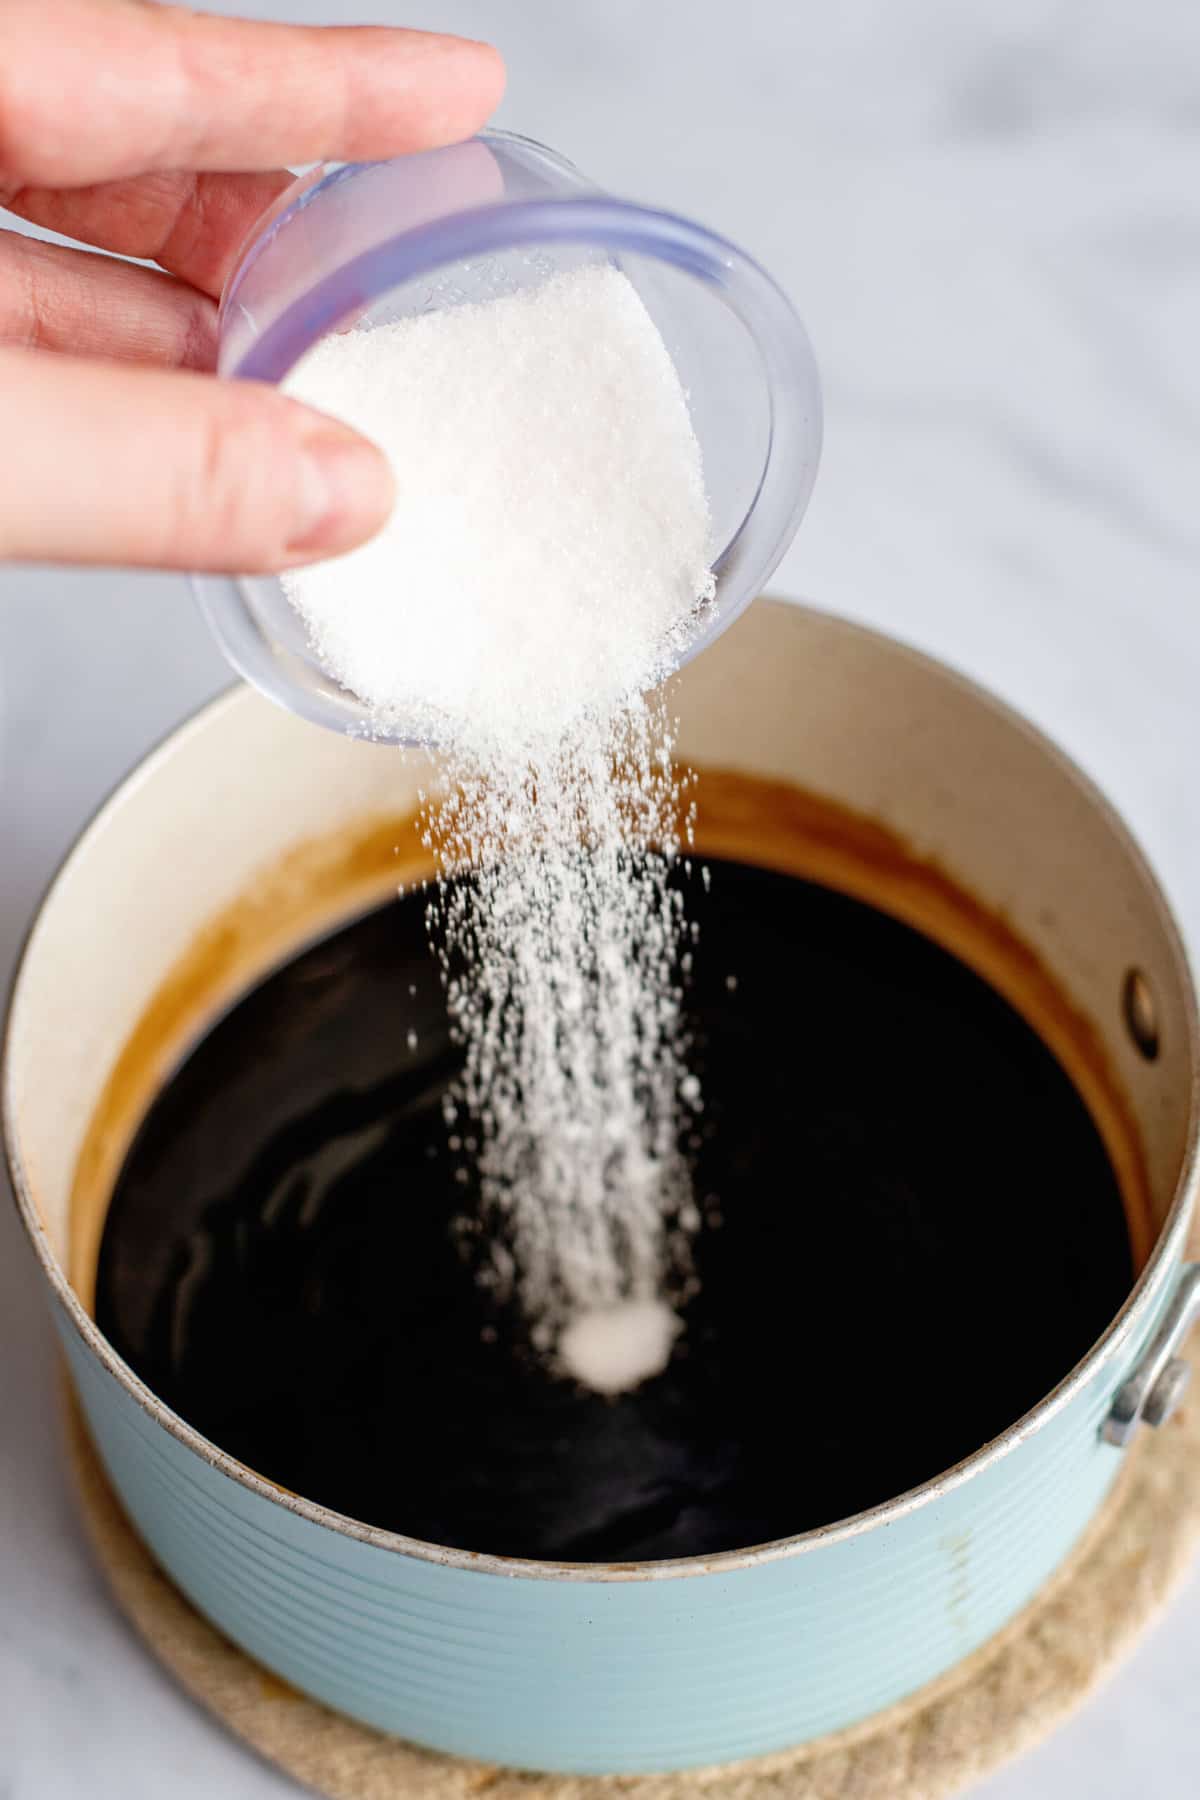 remove from heat and stir in sugar